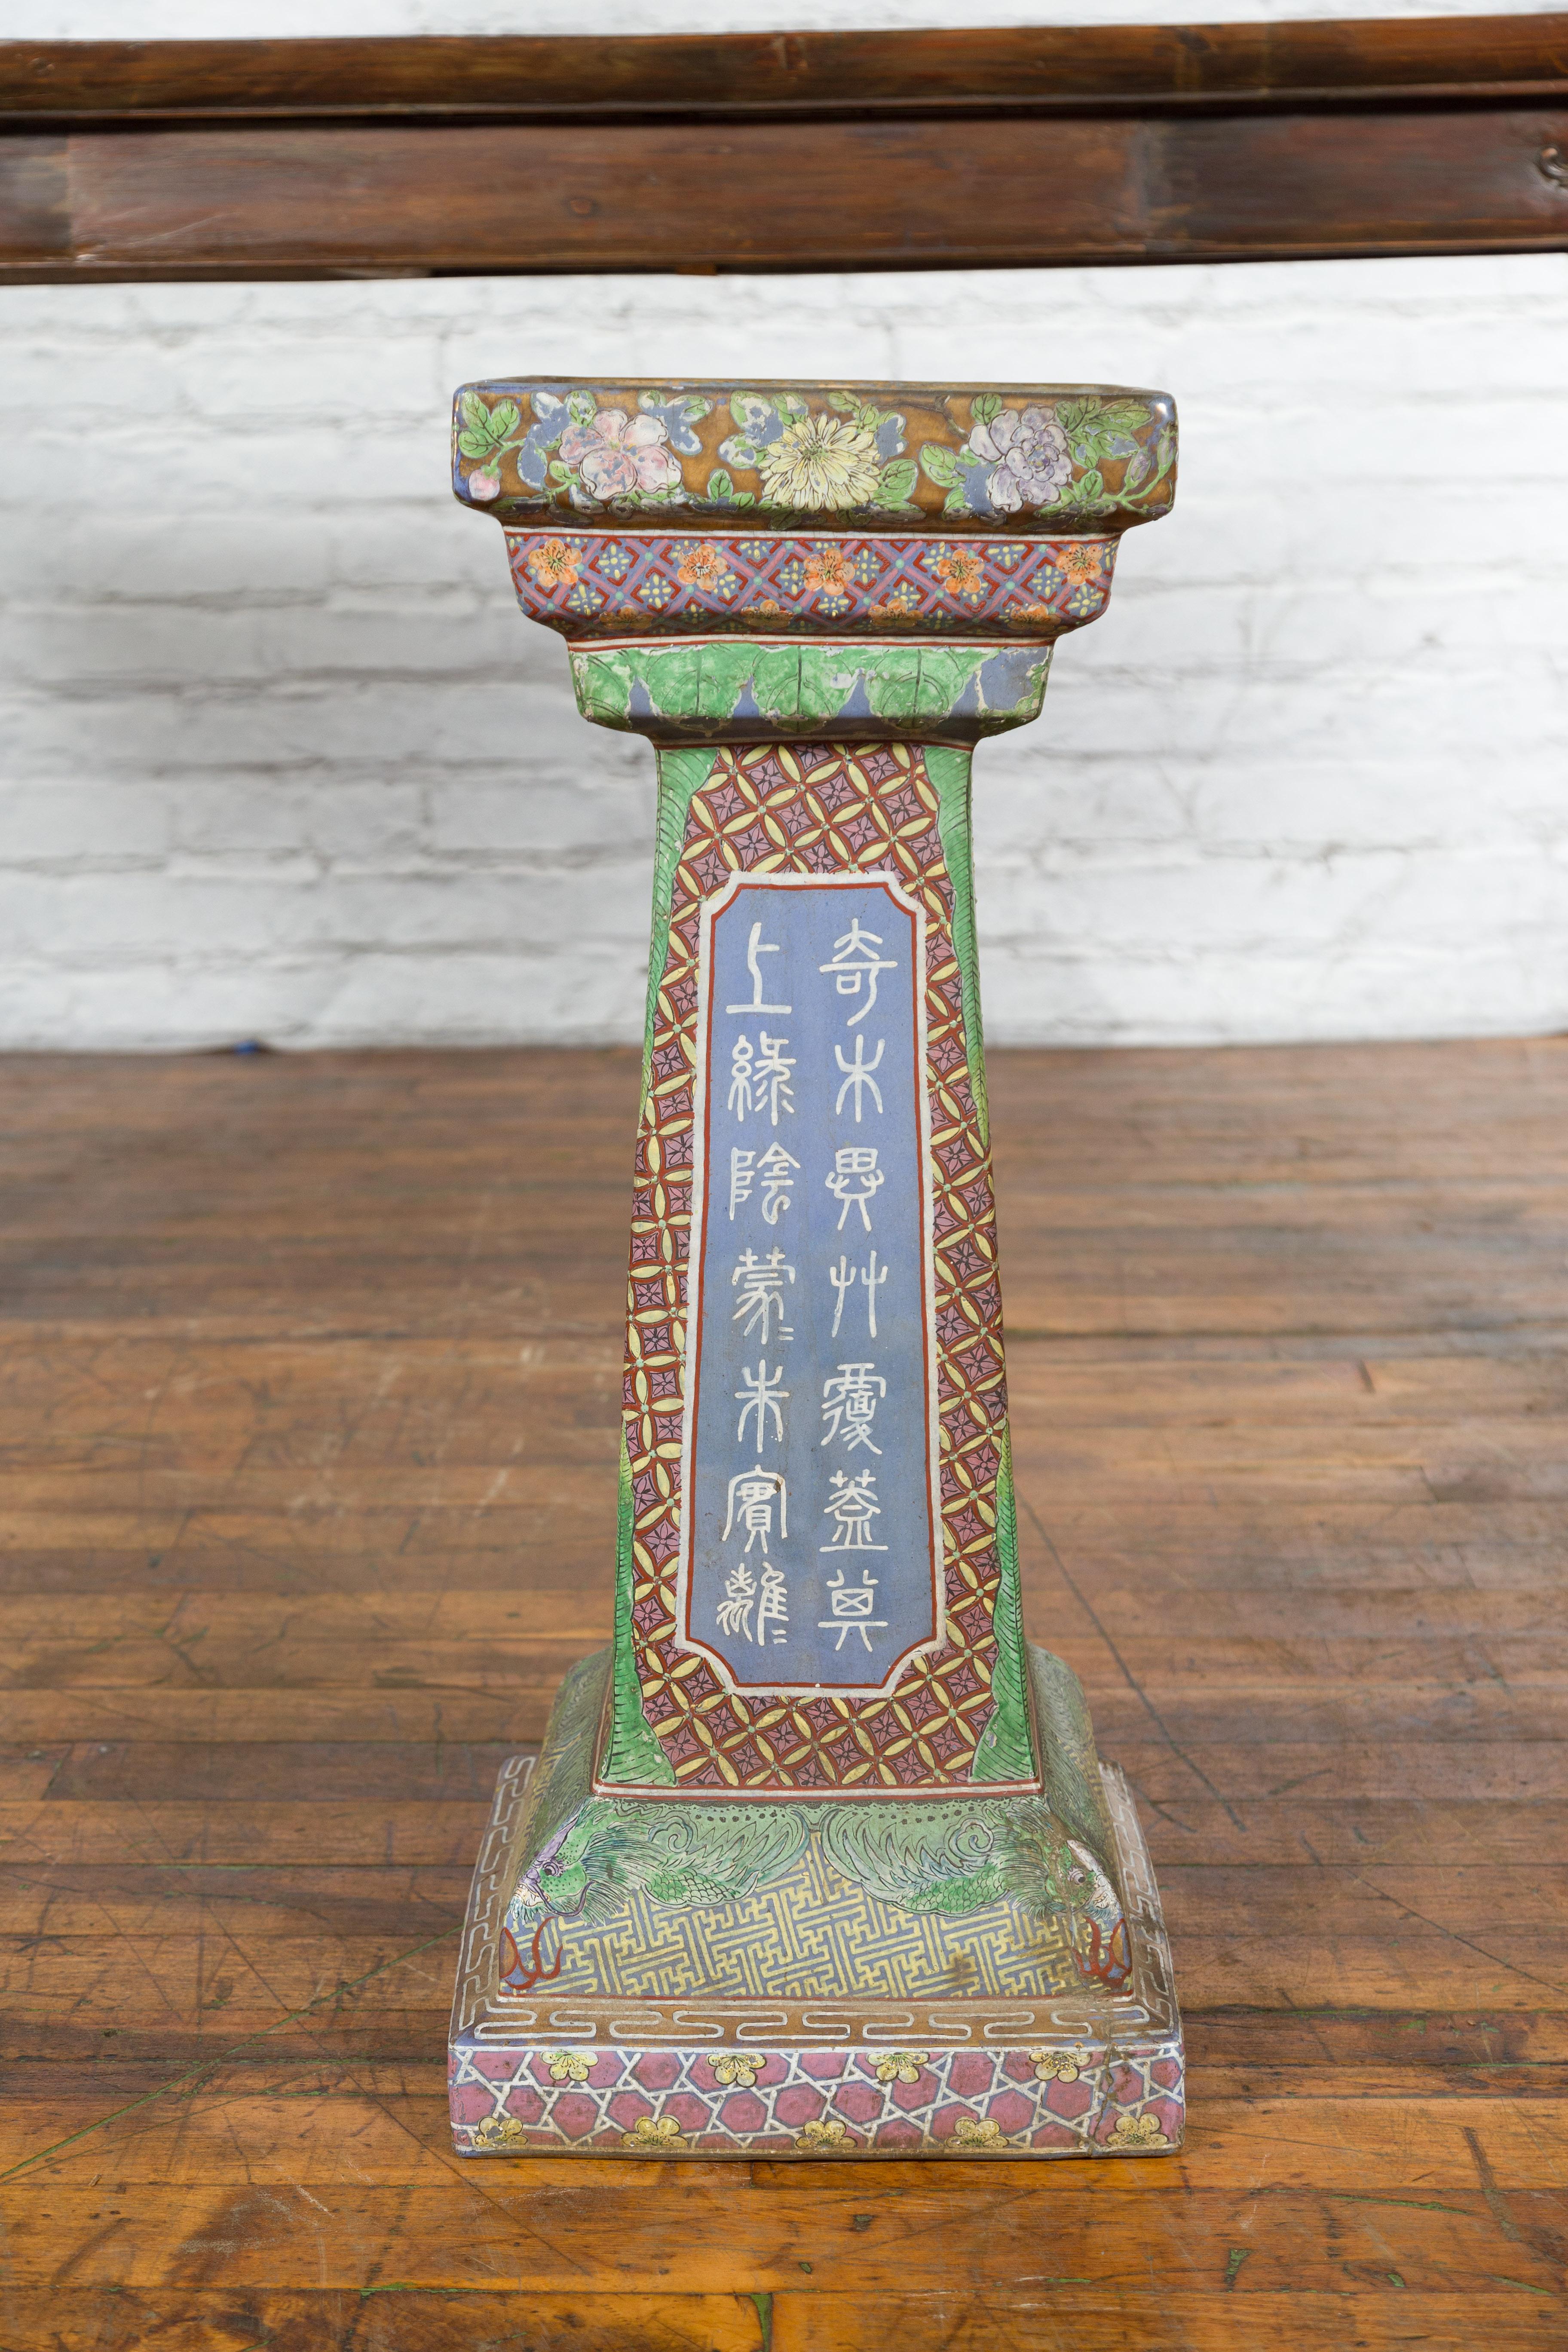 Chinese Vintage Ceramic Pedestal Stand with Hand-Painted Calligraphy and Figures For Sale 2